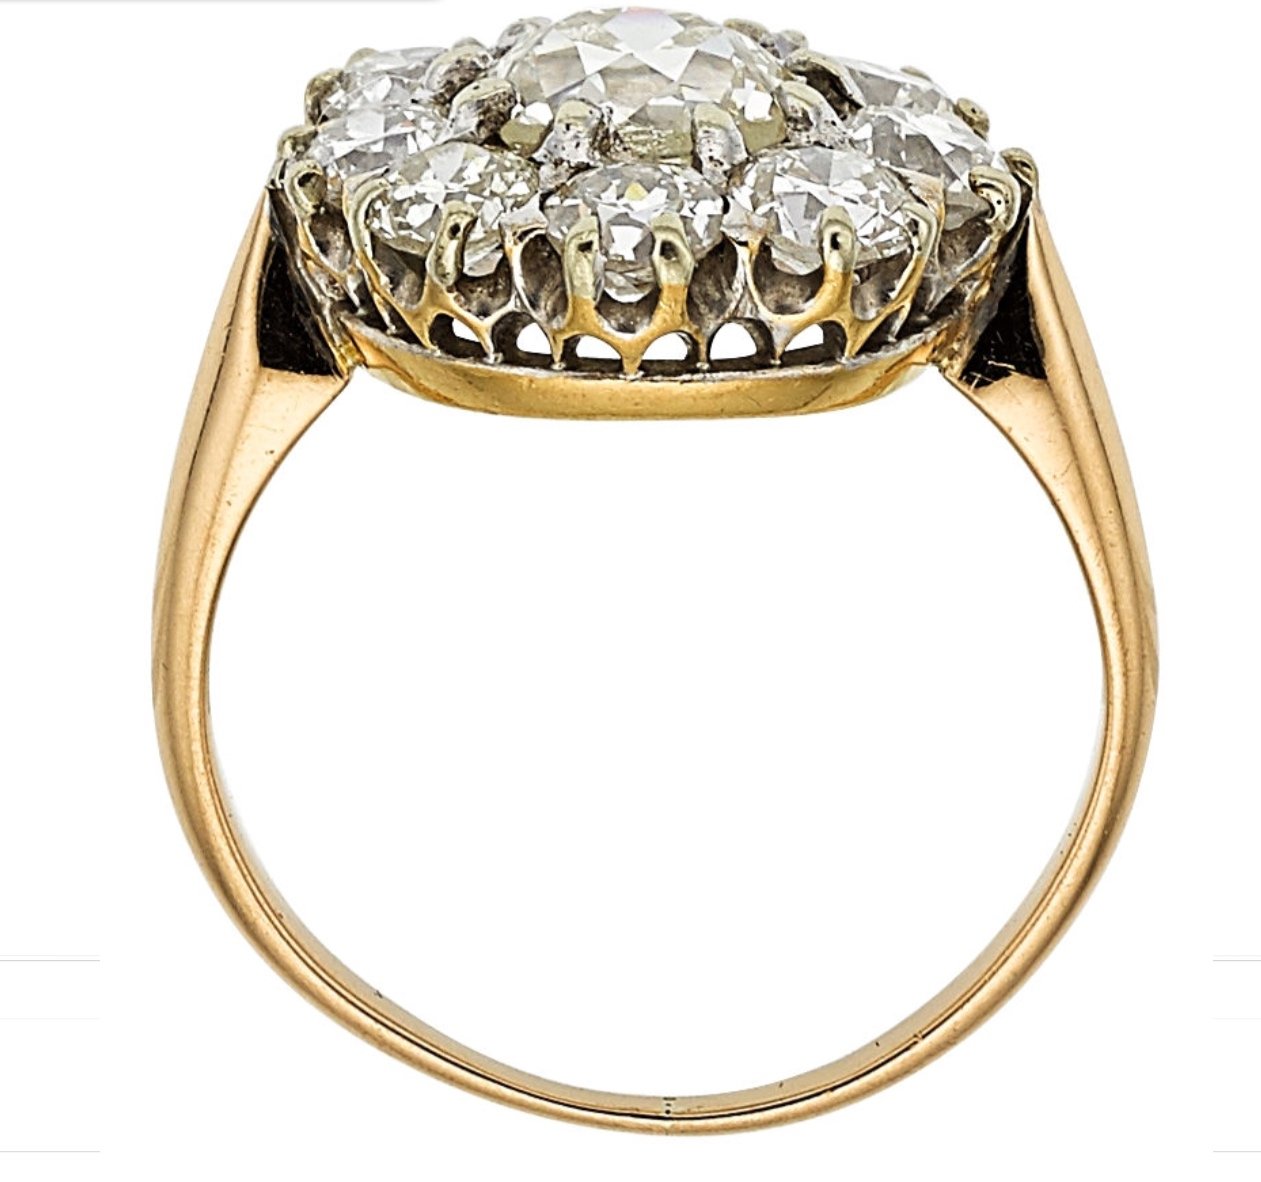 Antique 14kt Yellow Gold and Platinum Old European Cut Diamond Halo Ring